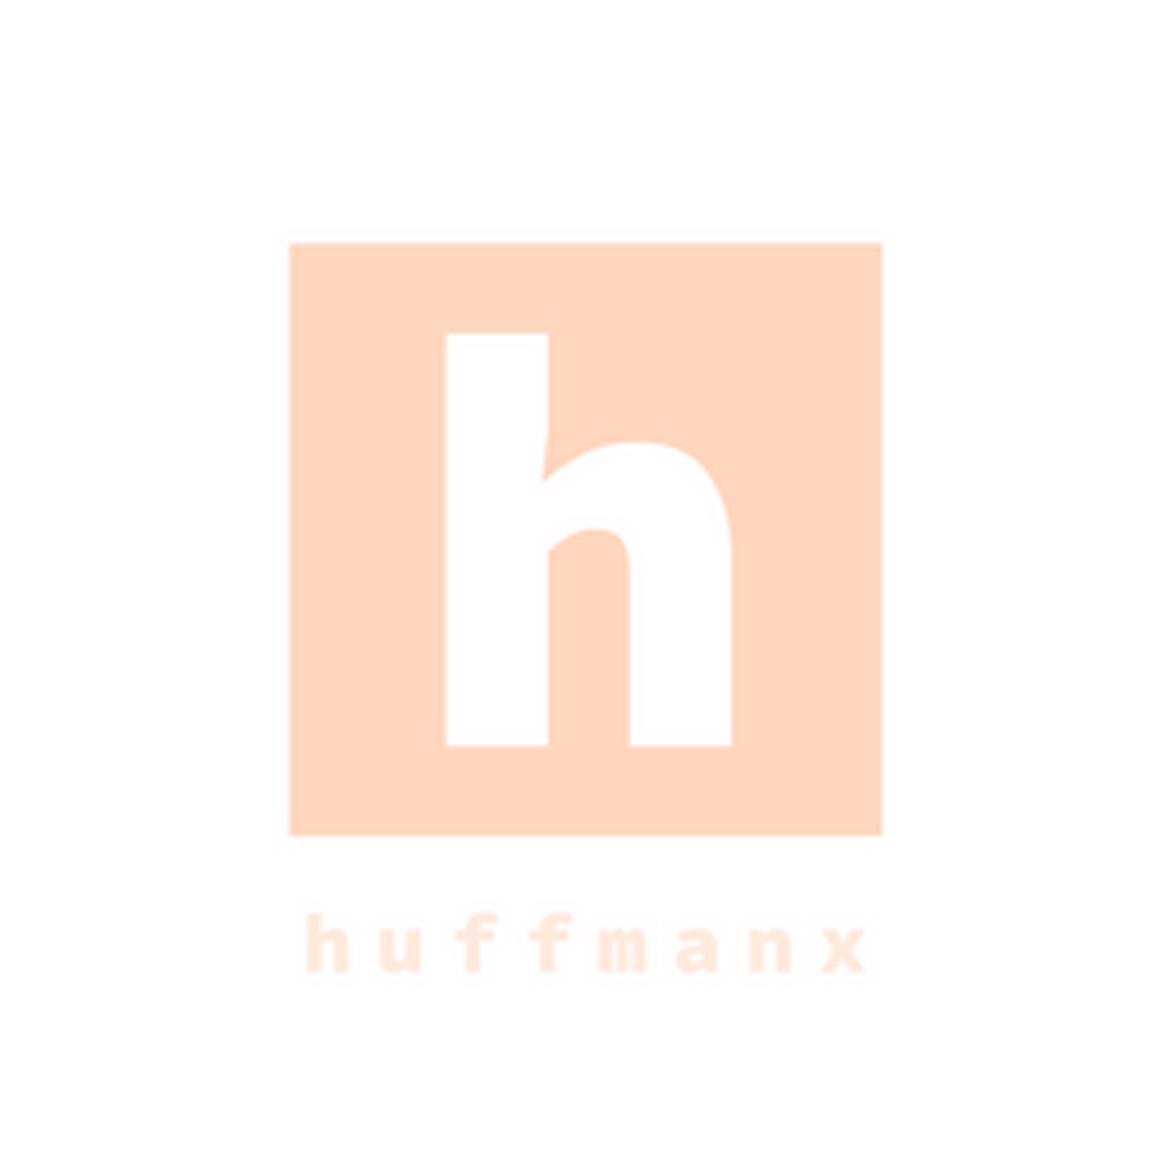 Huffmanx's images